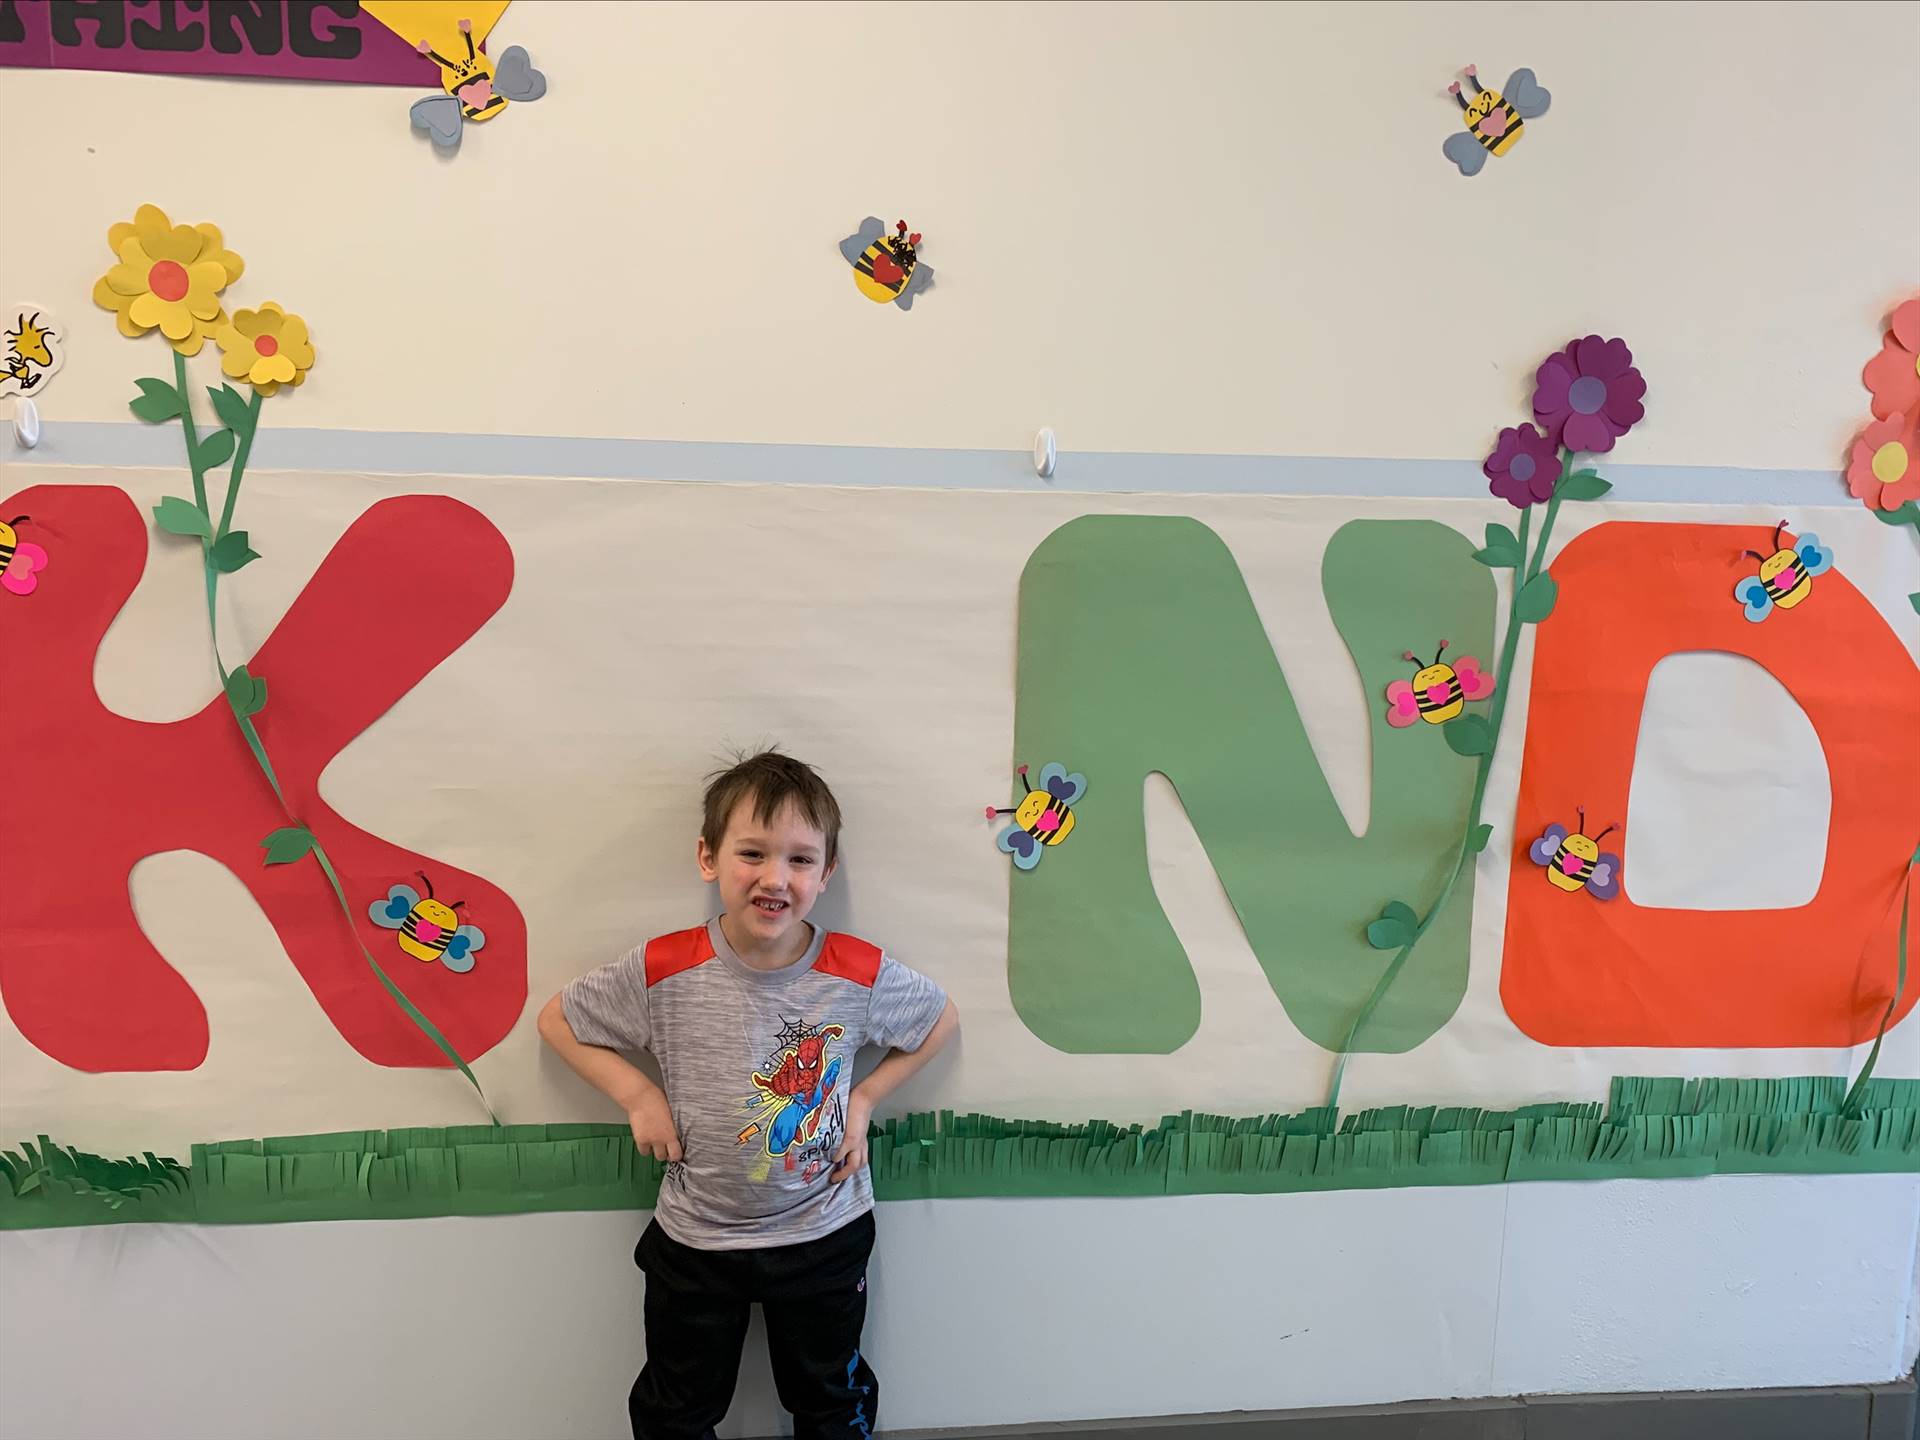 student is "I" in a large K I ND poster